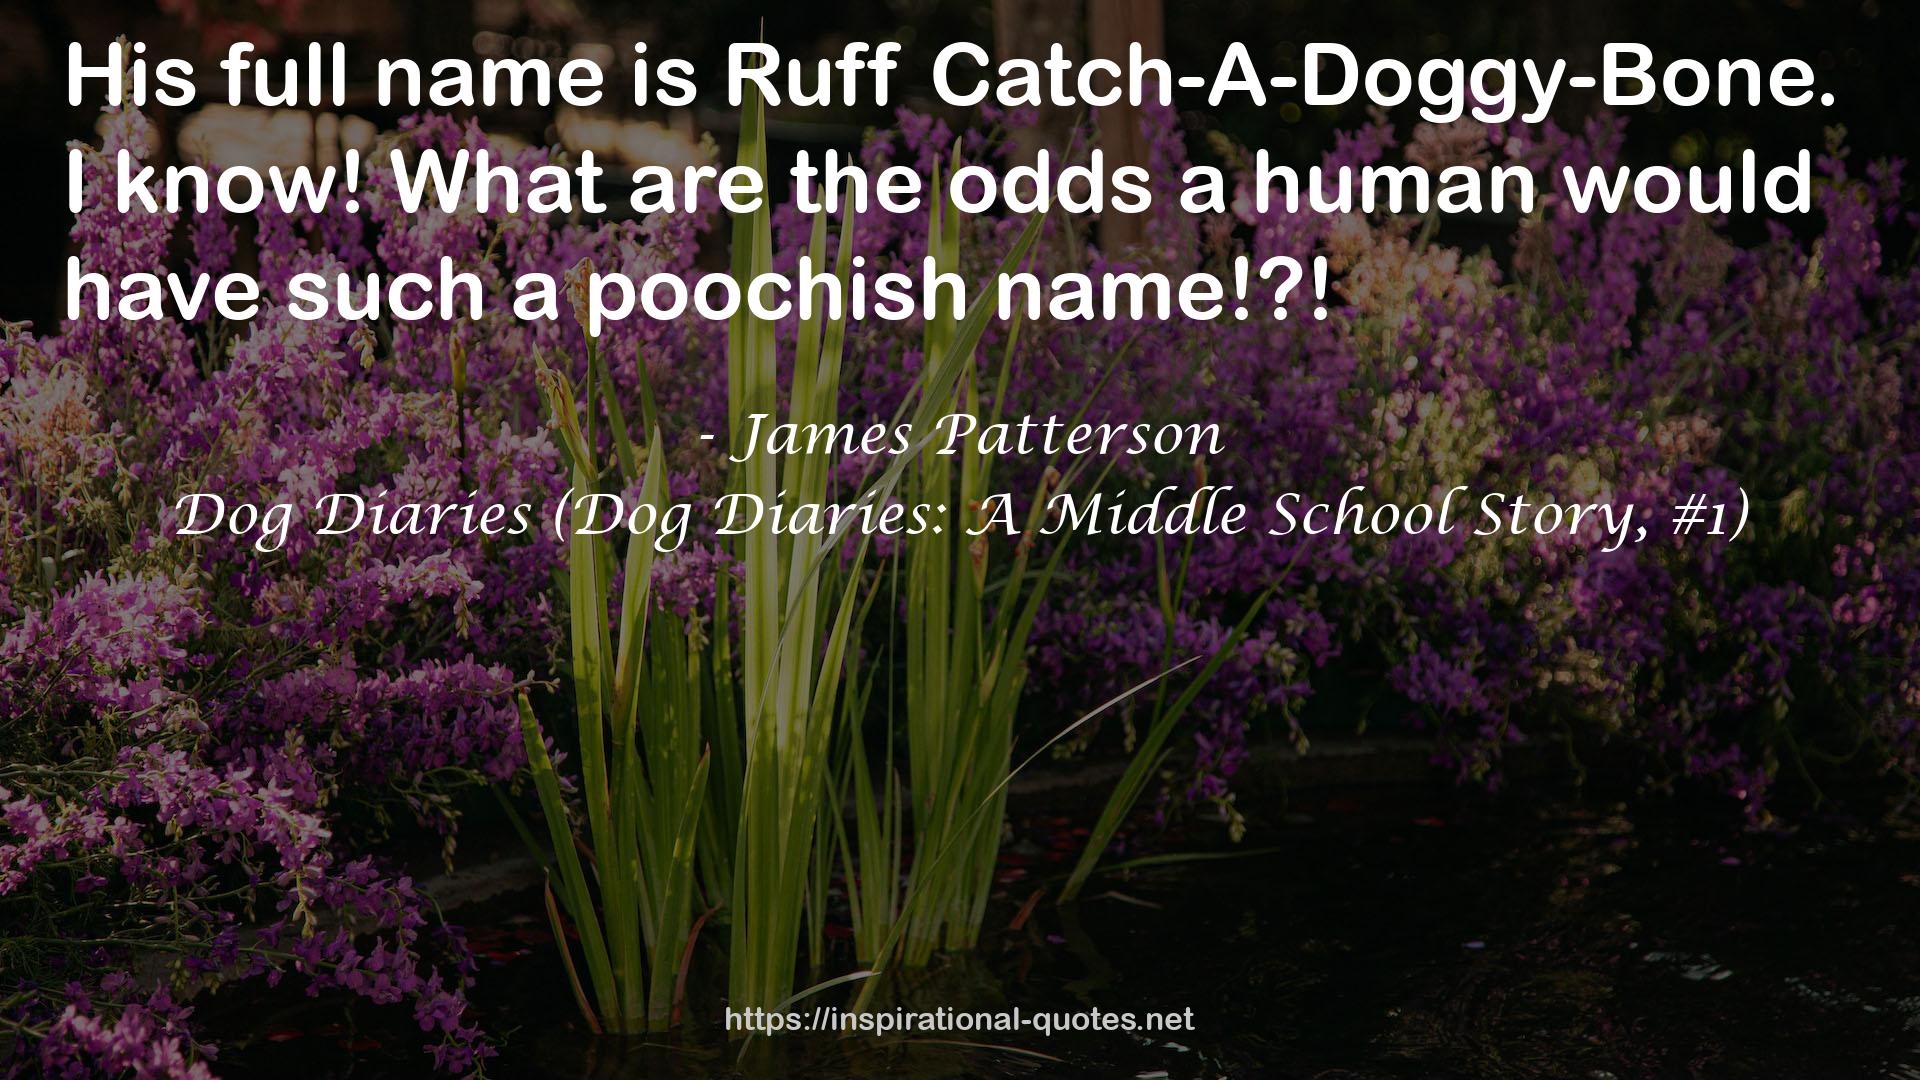 Dog Diaries (Dog Diaries: A Middle School Story, #1) QUOTES